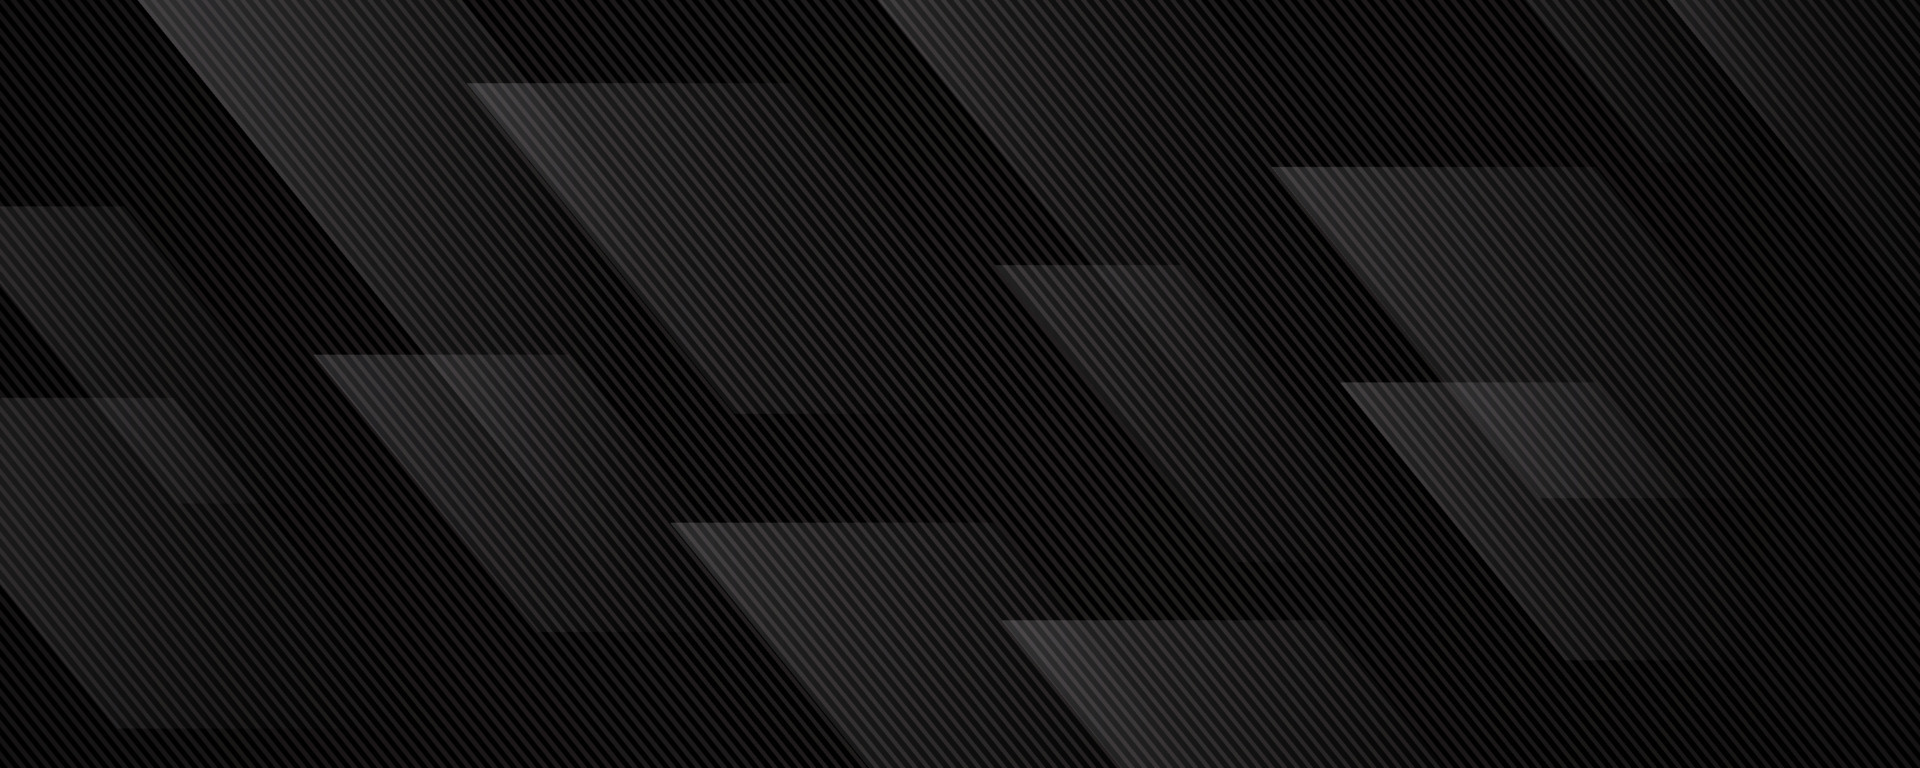 3D black geometric abstract background overlap layer on dark space with ...